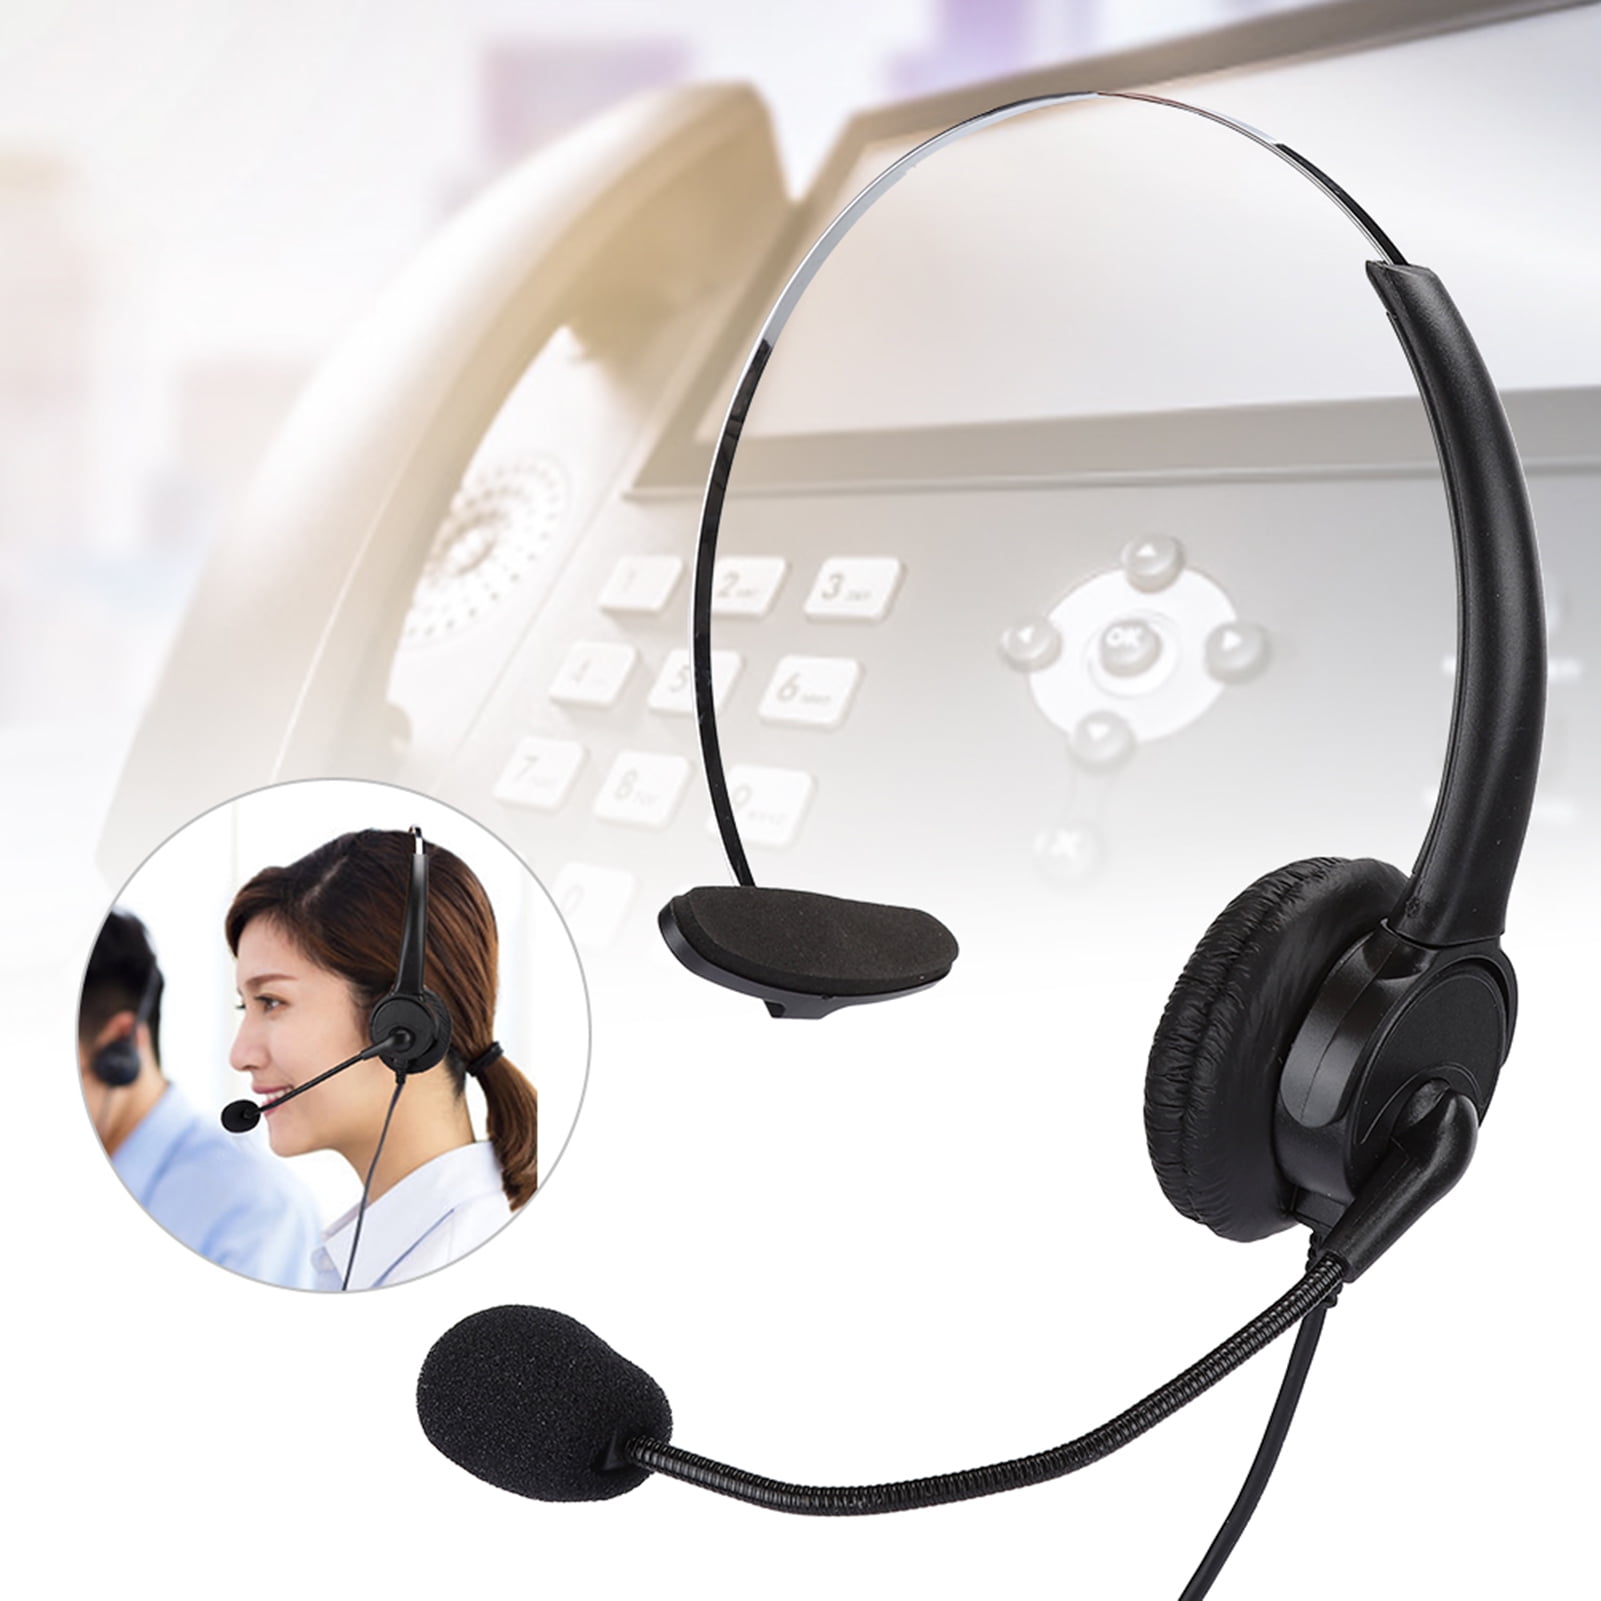 Logitech H111 Stero Headset Stereo Mini phone 3.5mm Wired 20 Hz 20 kHz Over  the head Binaural Supra aural 7.71 ft Cable Bi directional Microphone Black  Graphite - Office Depot